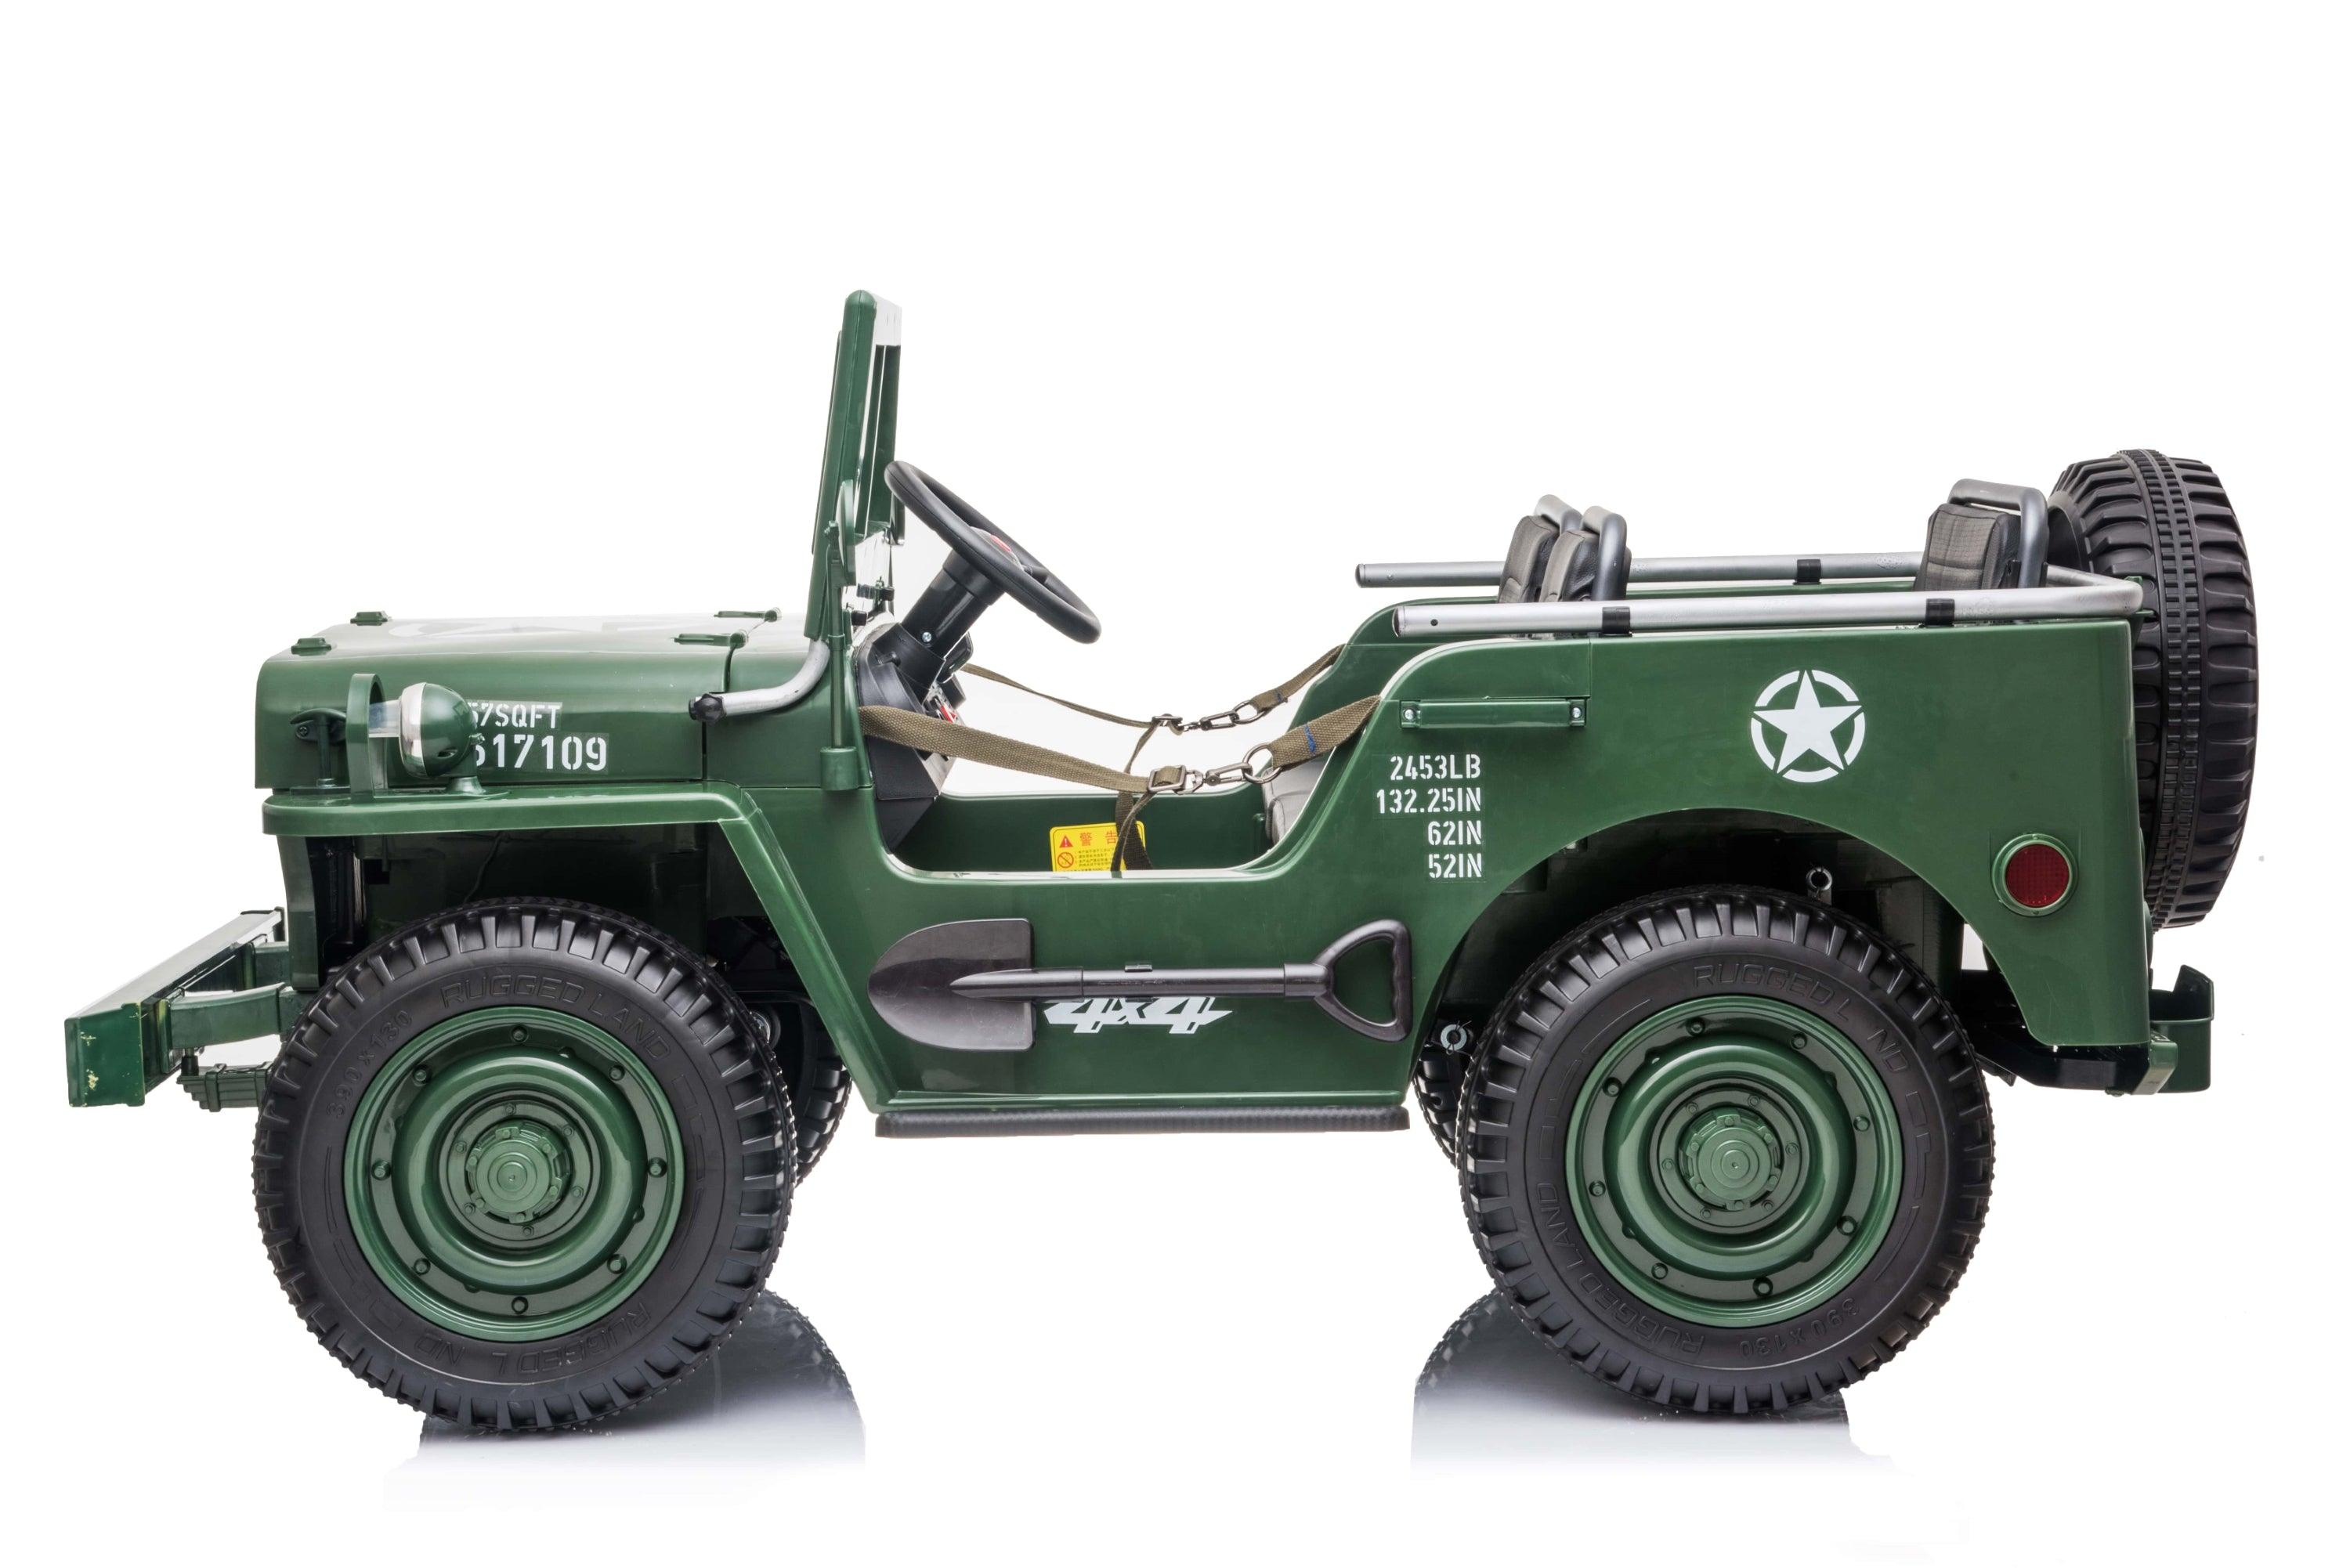 Available April 15th 24V Military Willy Jepp 3 Seater Electric Ride on - DTI Direct USA